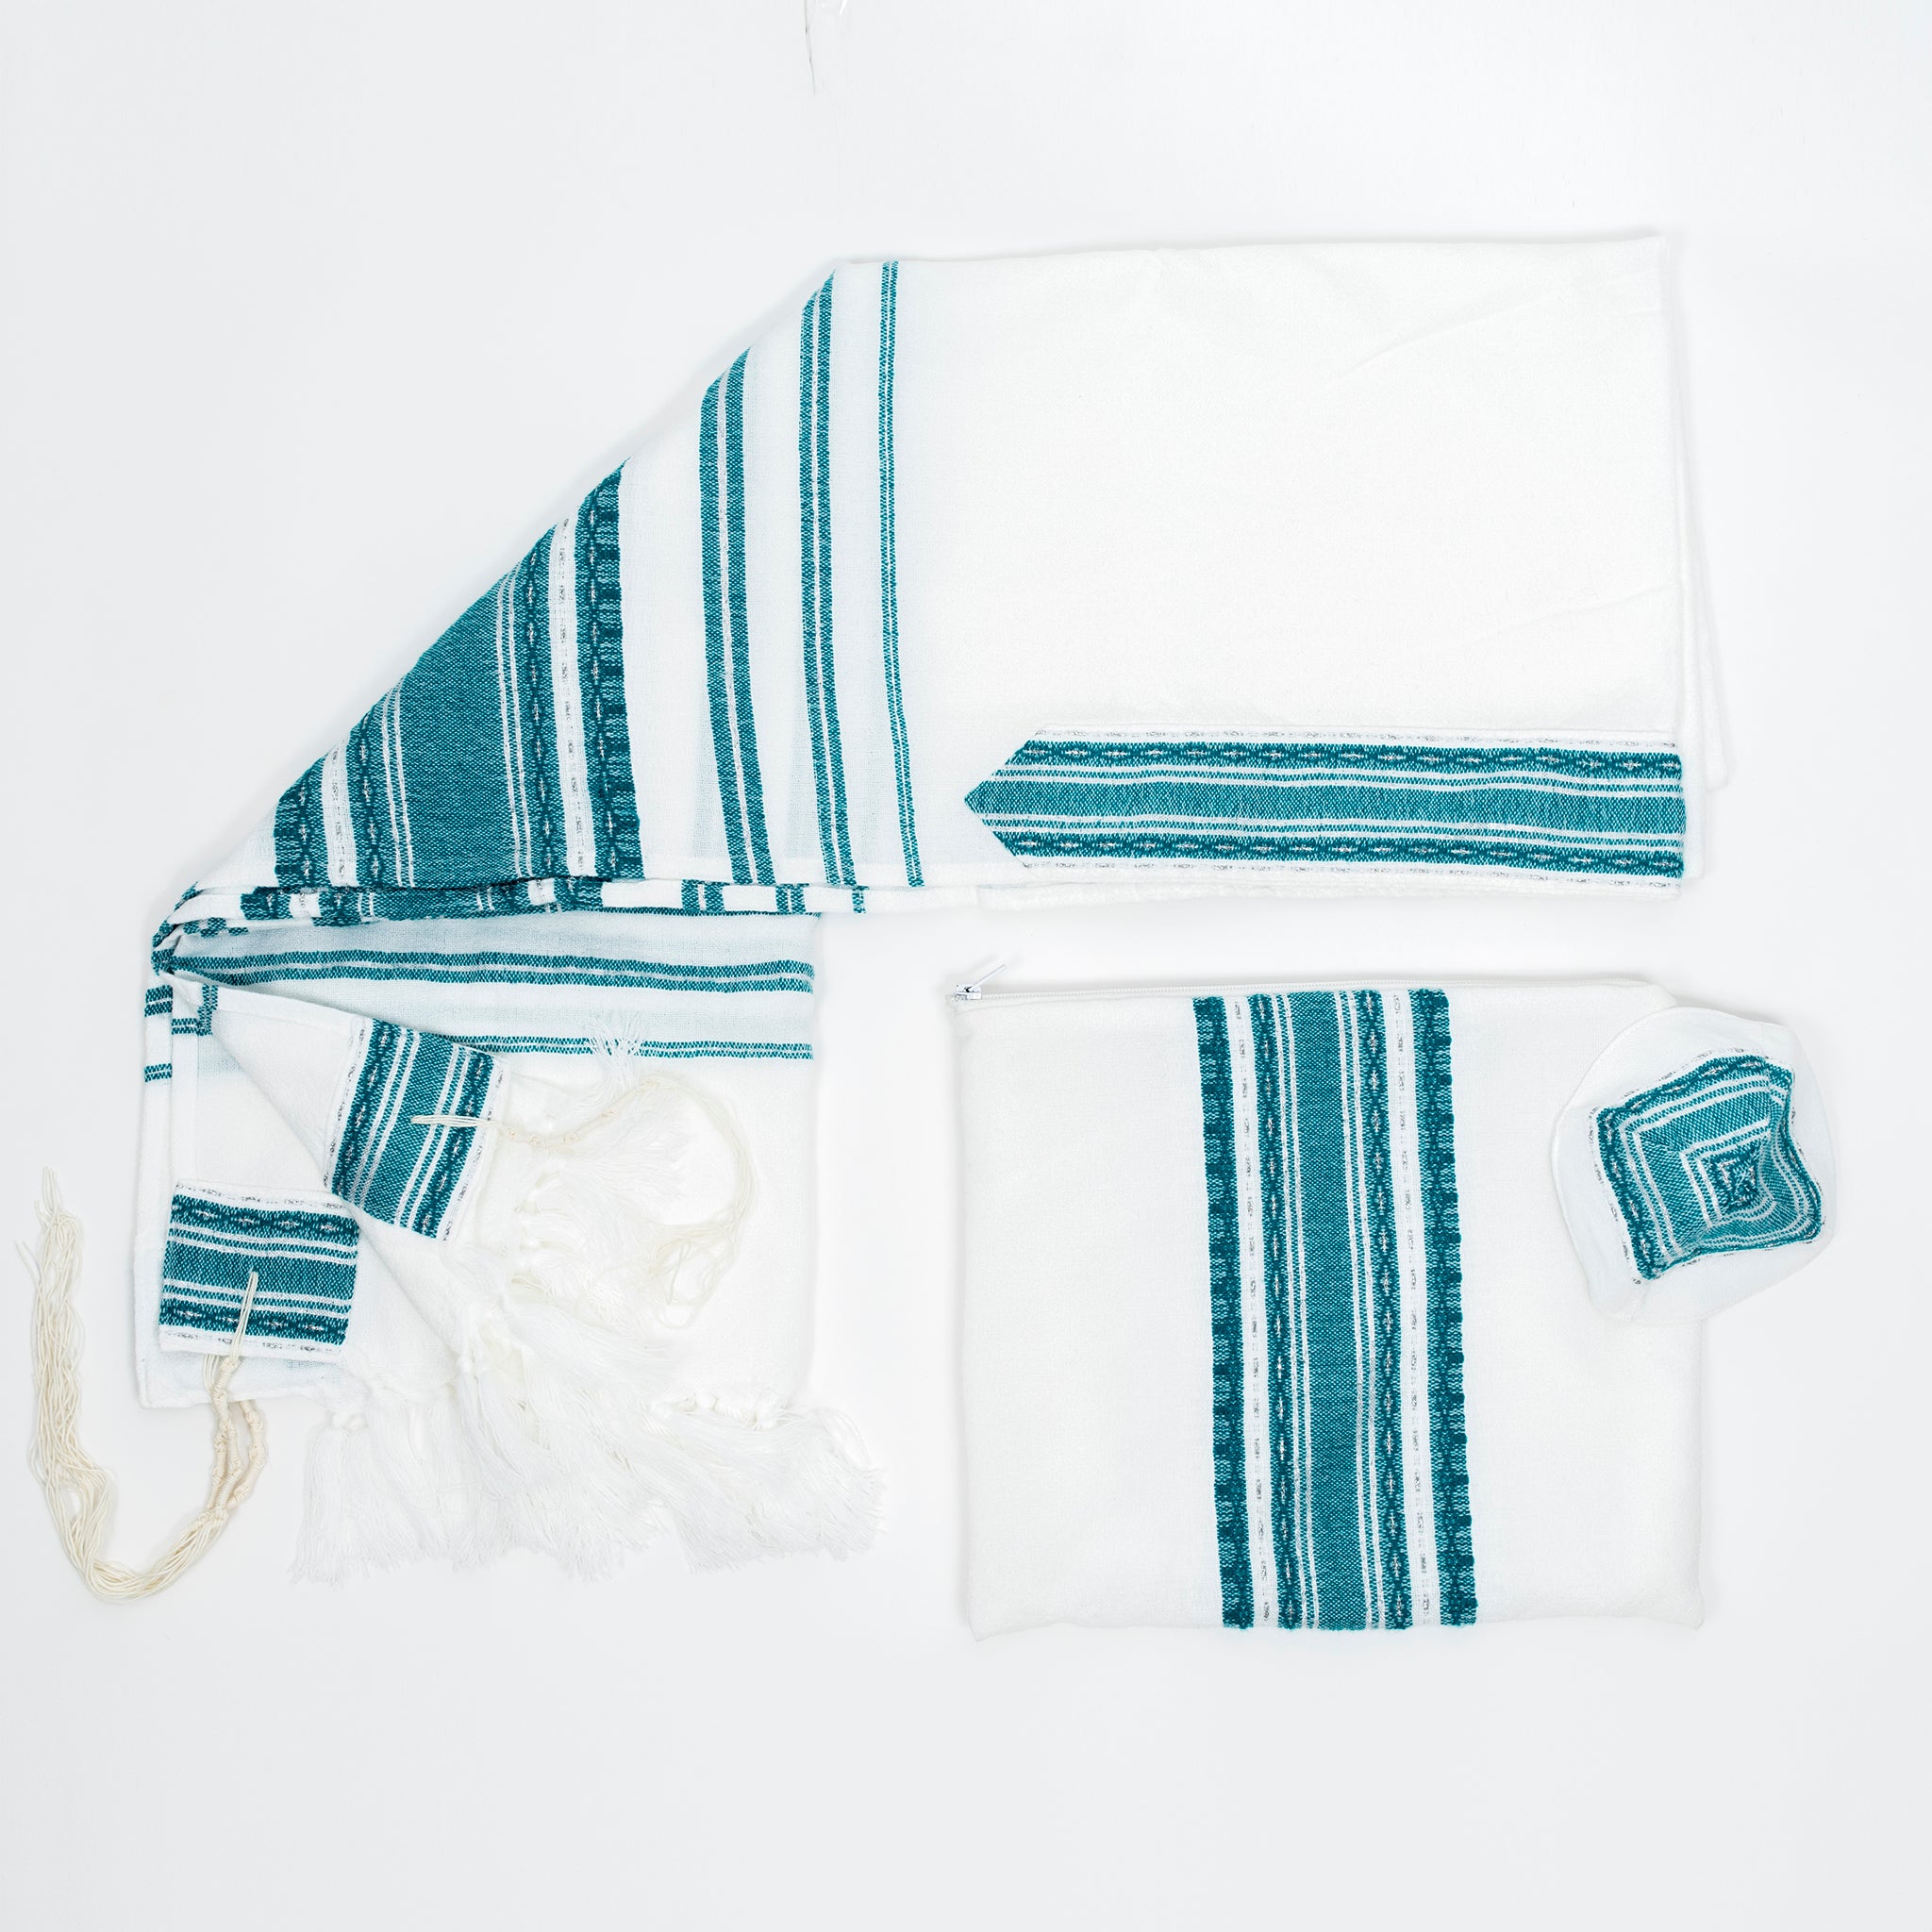 Samuel - Wool Tallit  - Turquoise and Silver on White